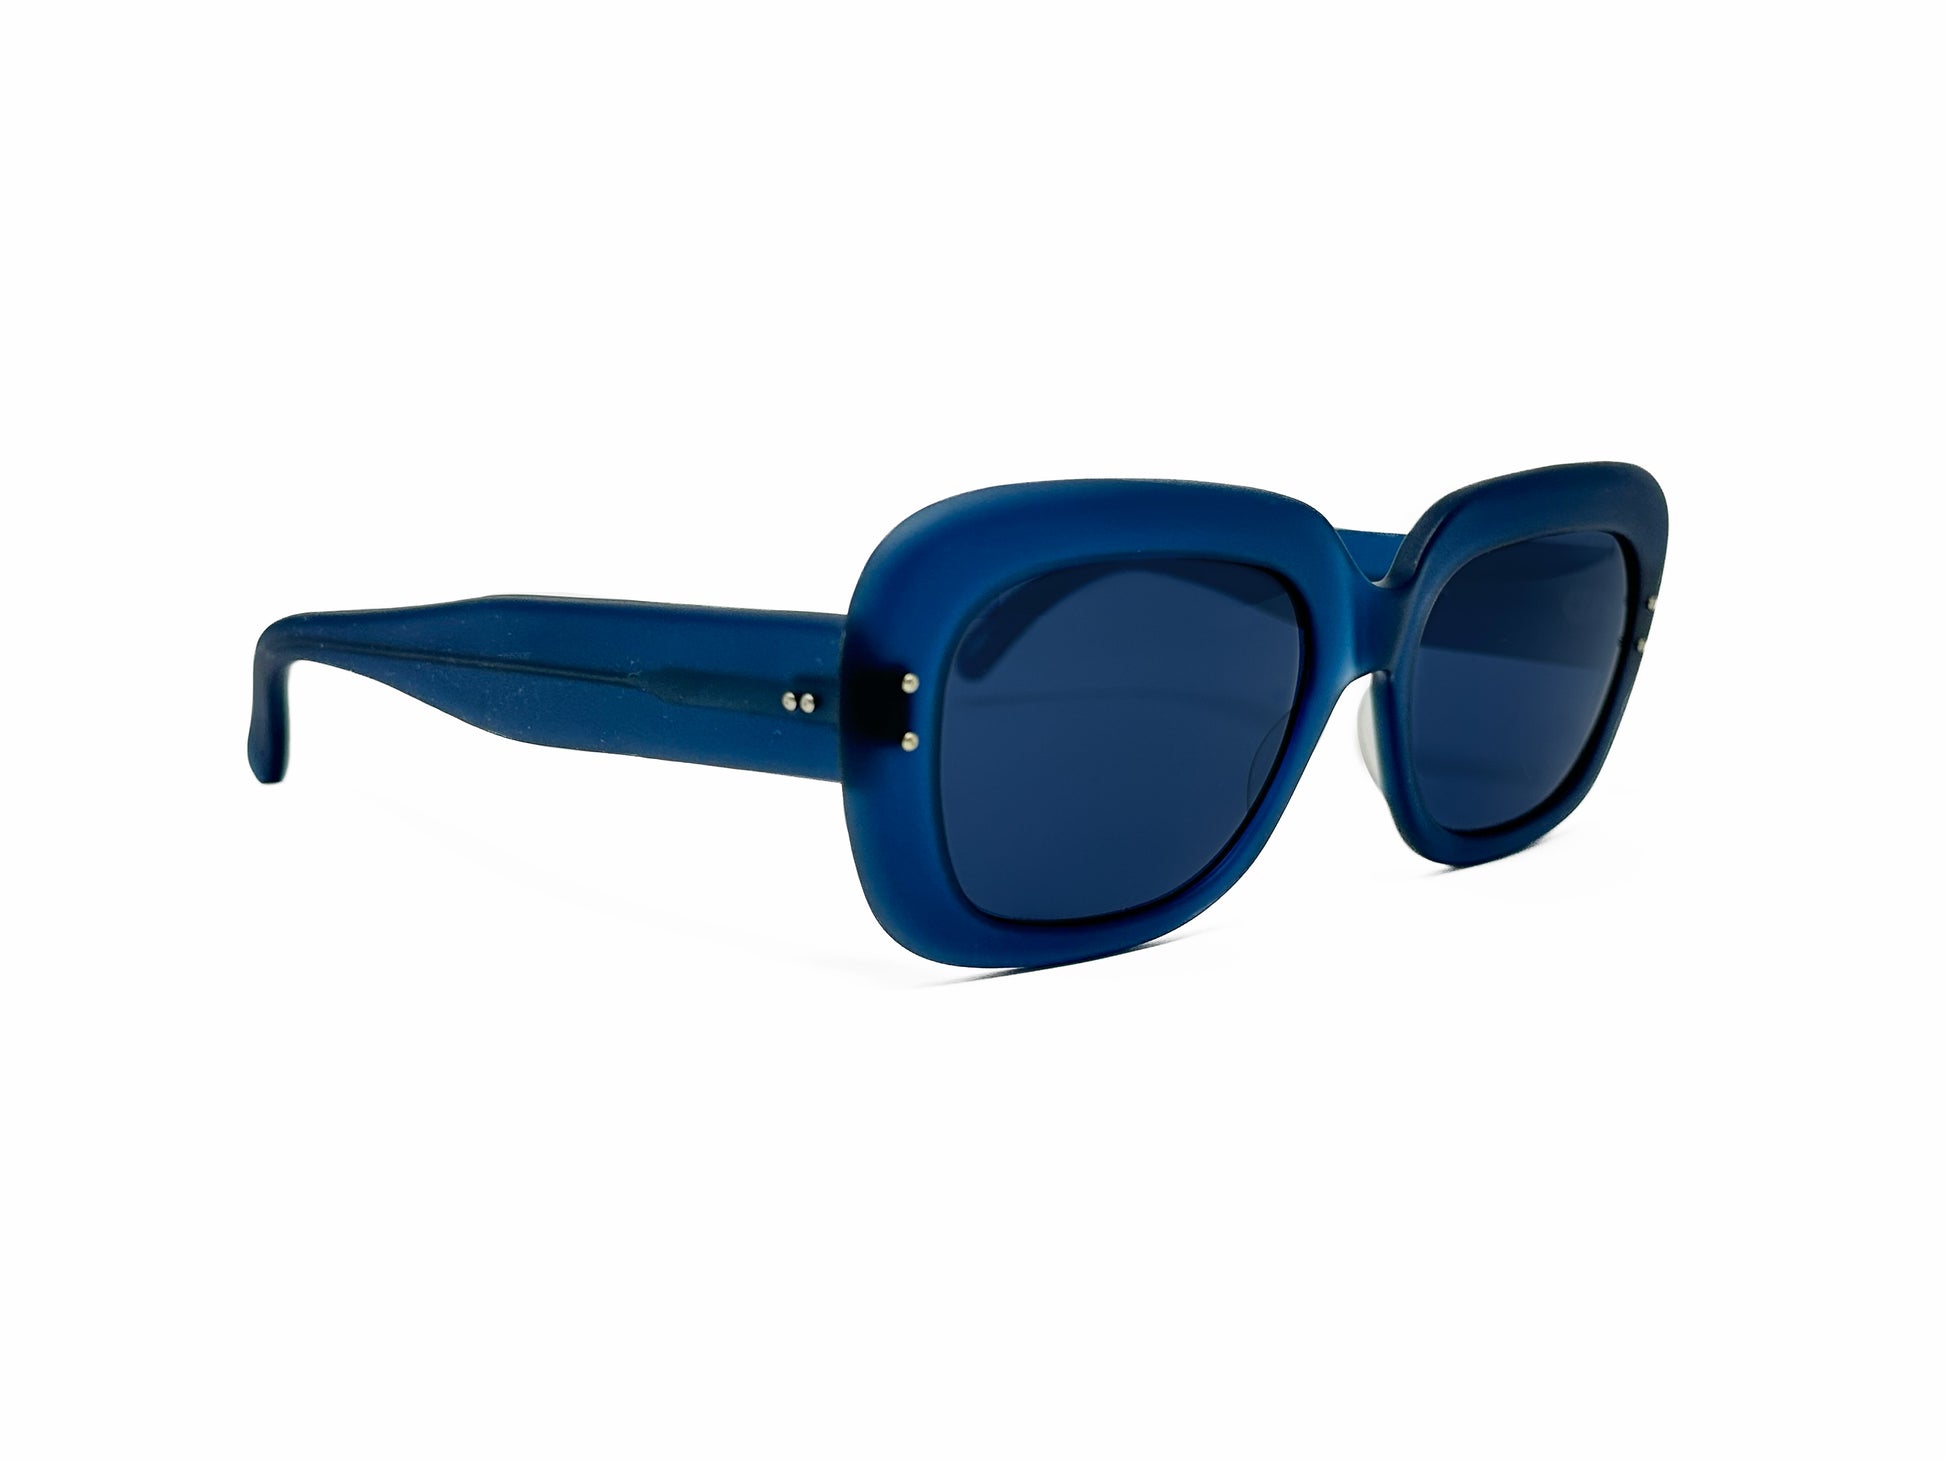 Kador rounded-square, acetate sunglasses. Model: 2. Color: 0016 - Blue with blue lenses. Side view.